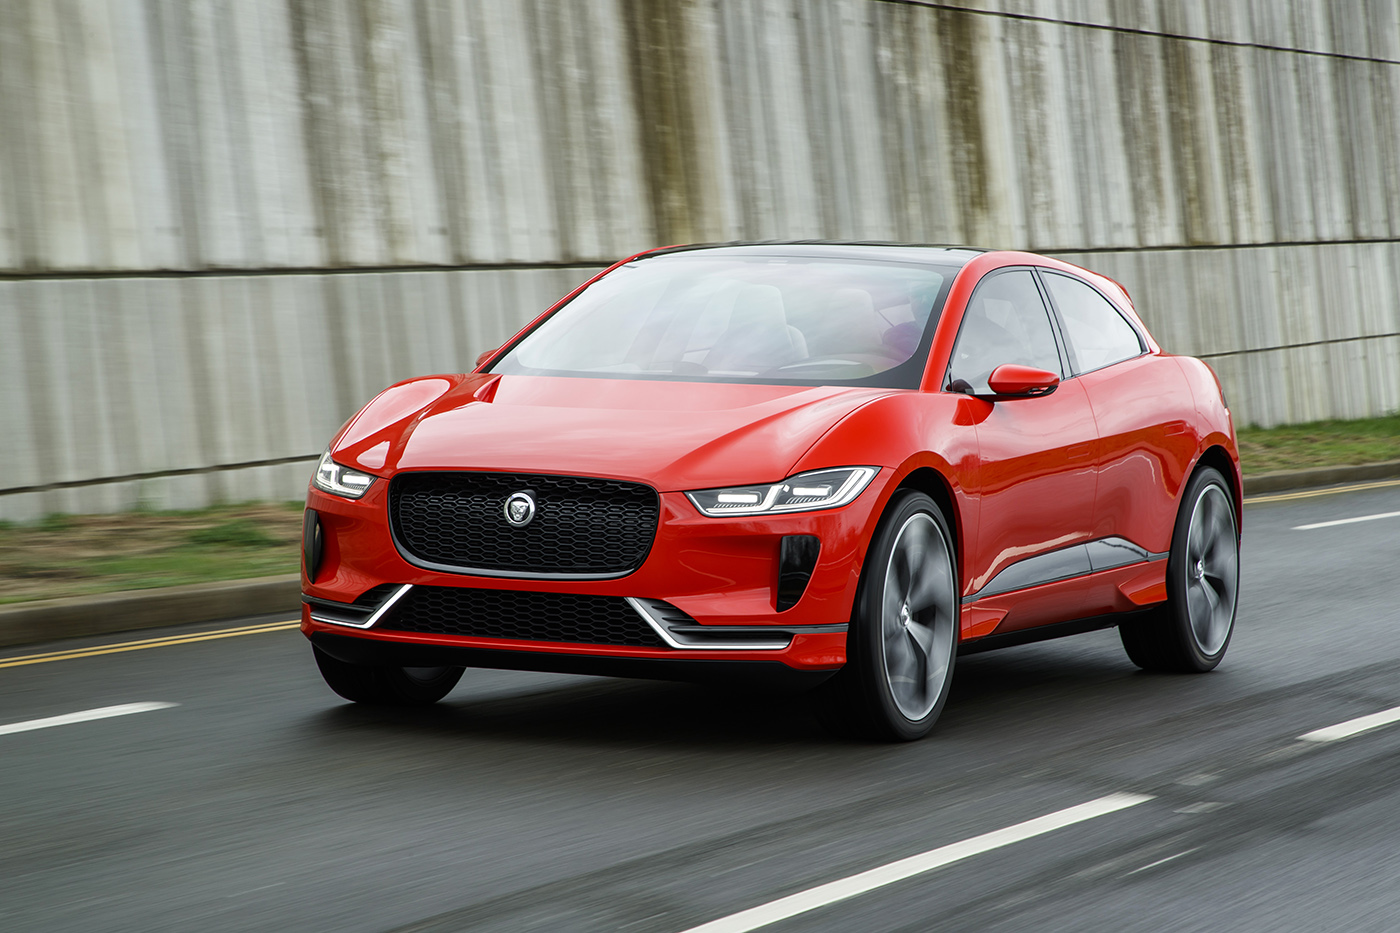 New Car Friday: Jaguar Goes Electric, Toyota Gets Sporty